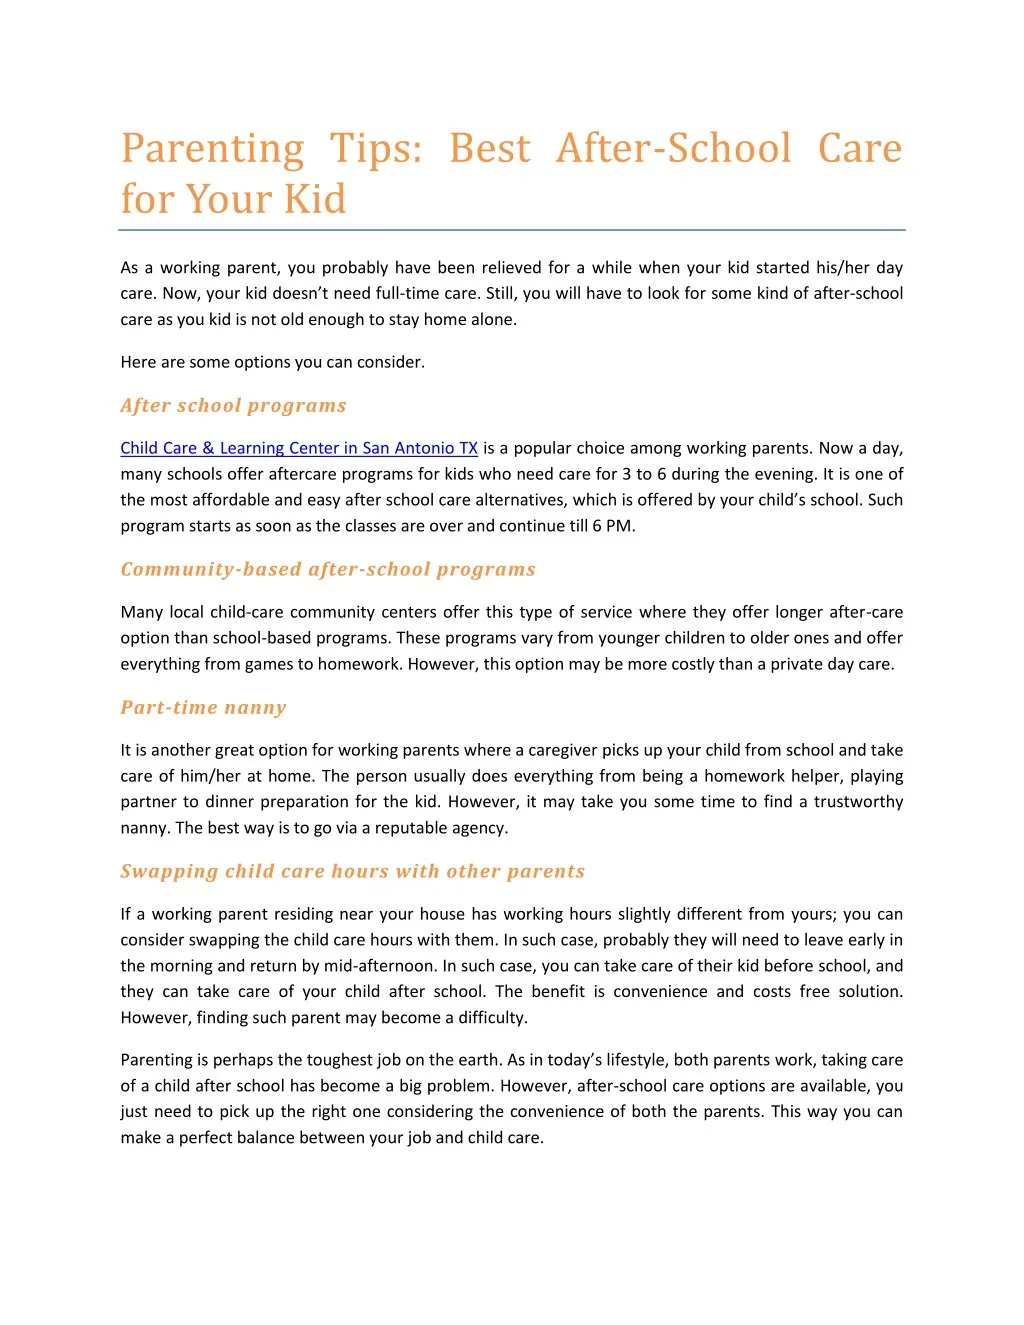 parenting tips best after school care for your kid